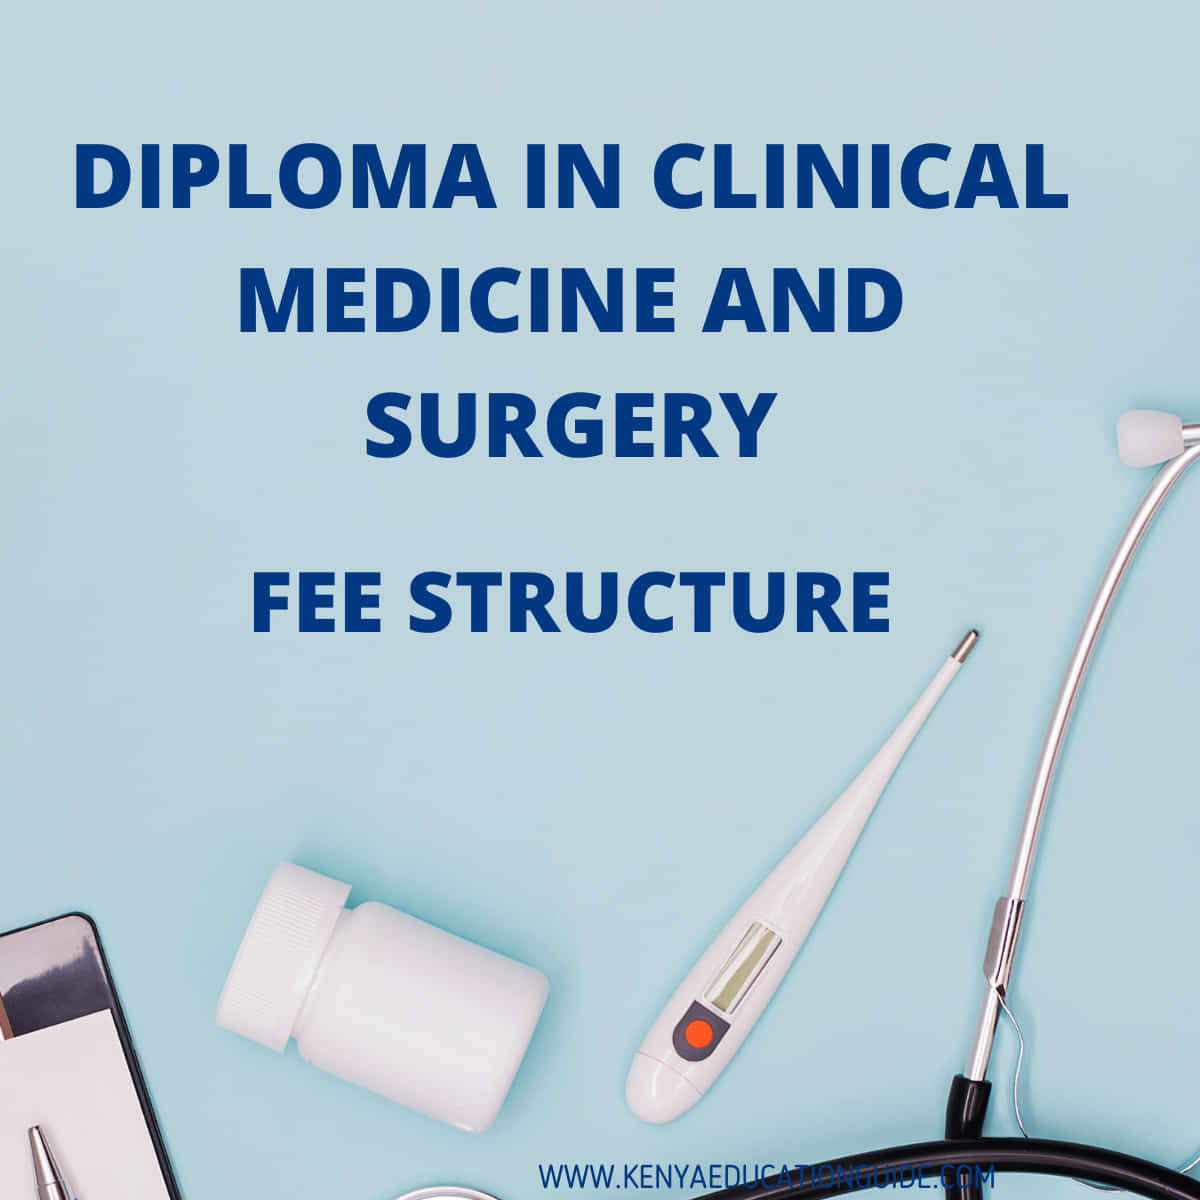 Diploma in clinical medicine and surgery fee structure